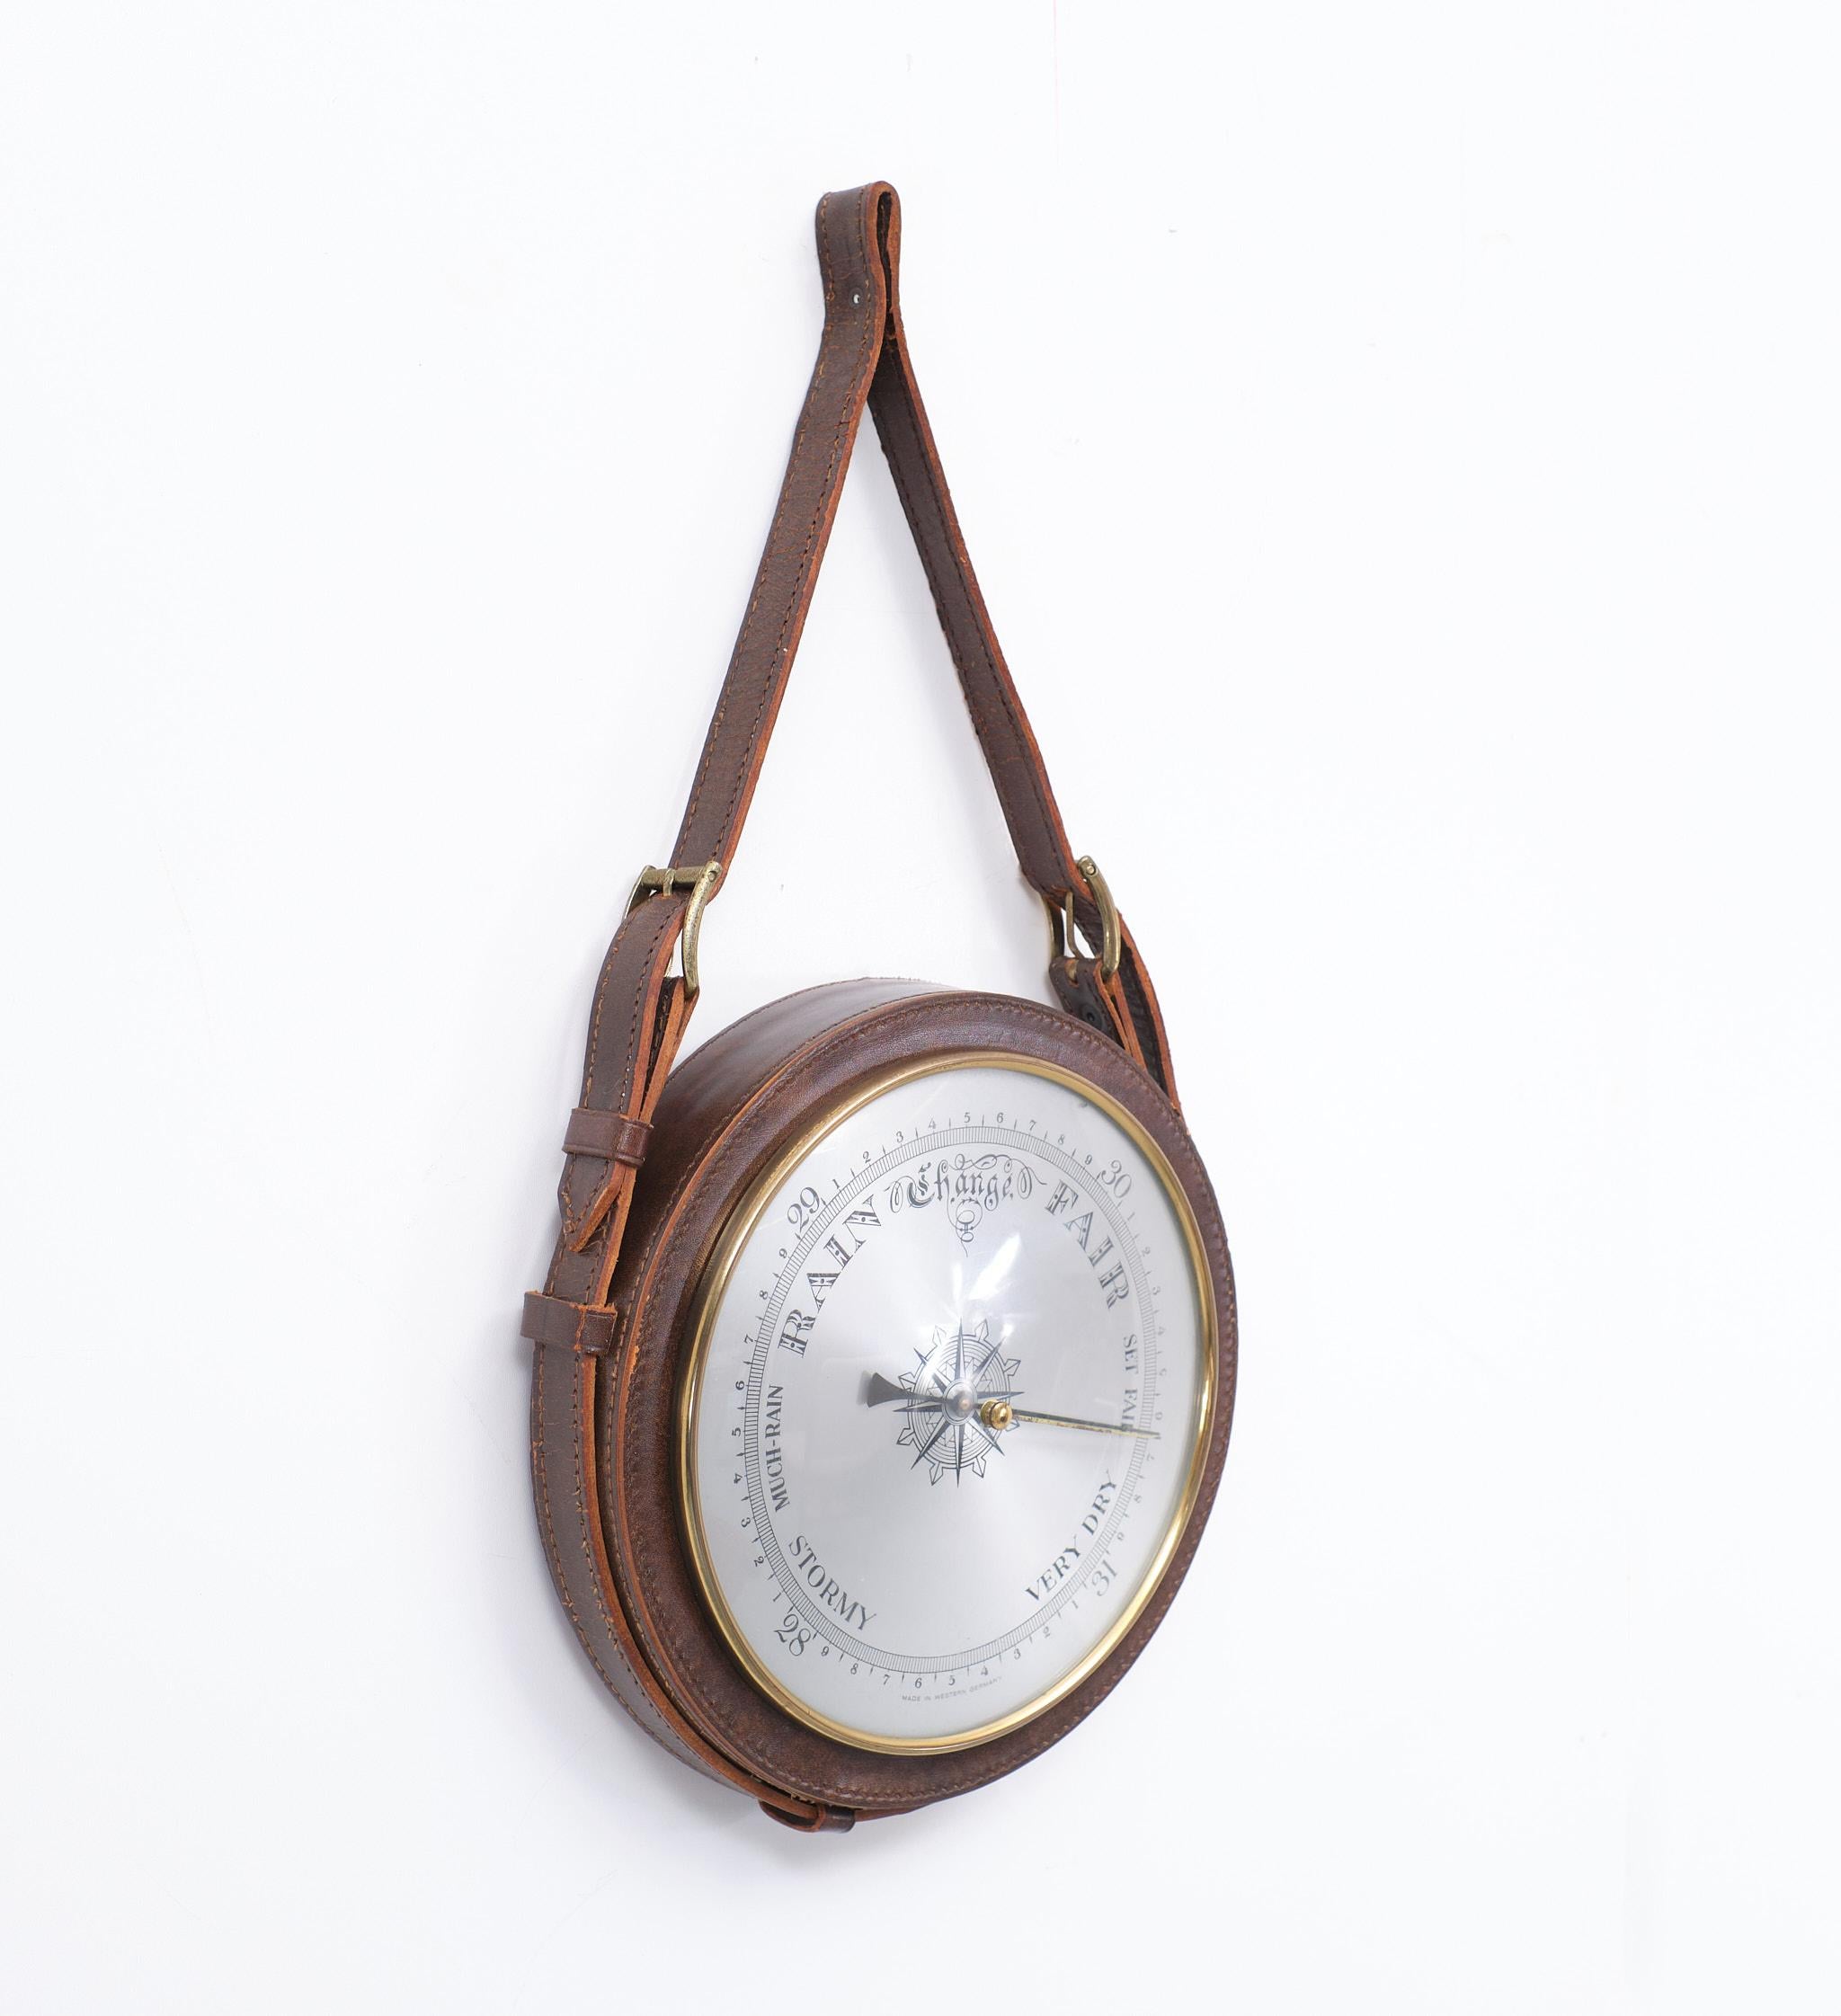 Very nice round hanging Barometer, surrounded with stitch Brown Leather.
Made in Western Germany in the 1960s. Good working condition.